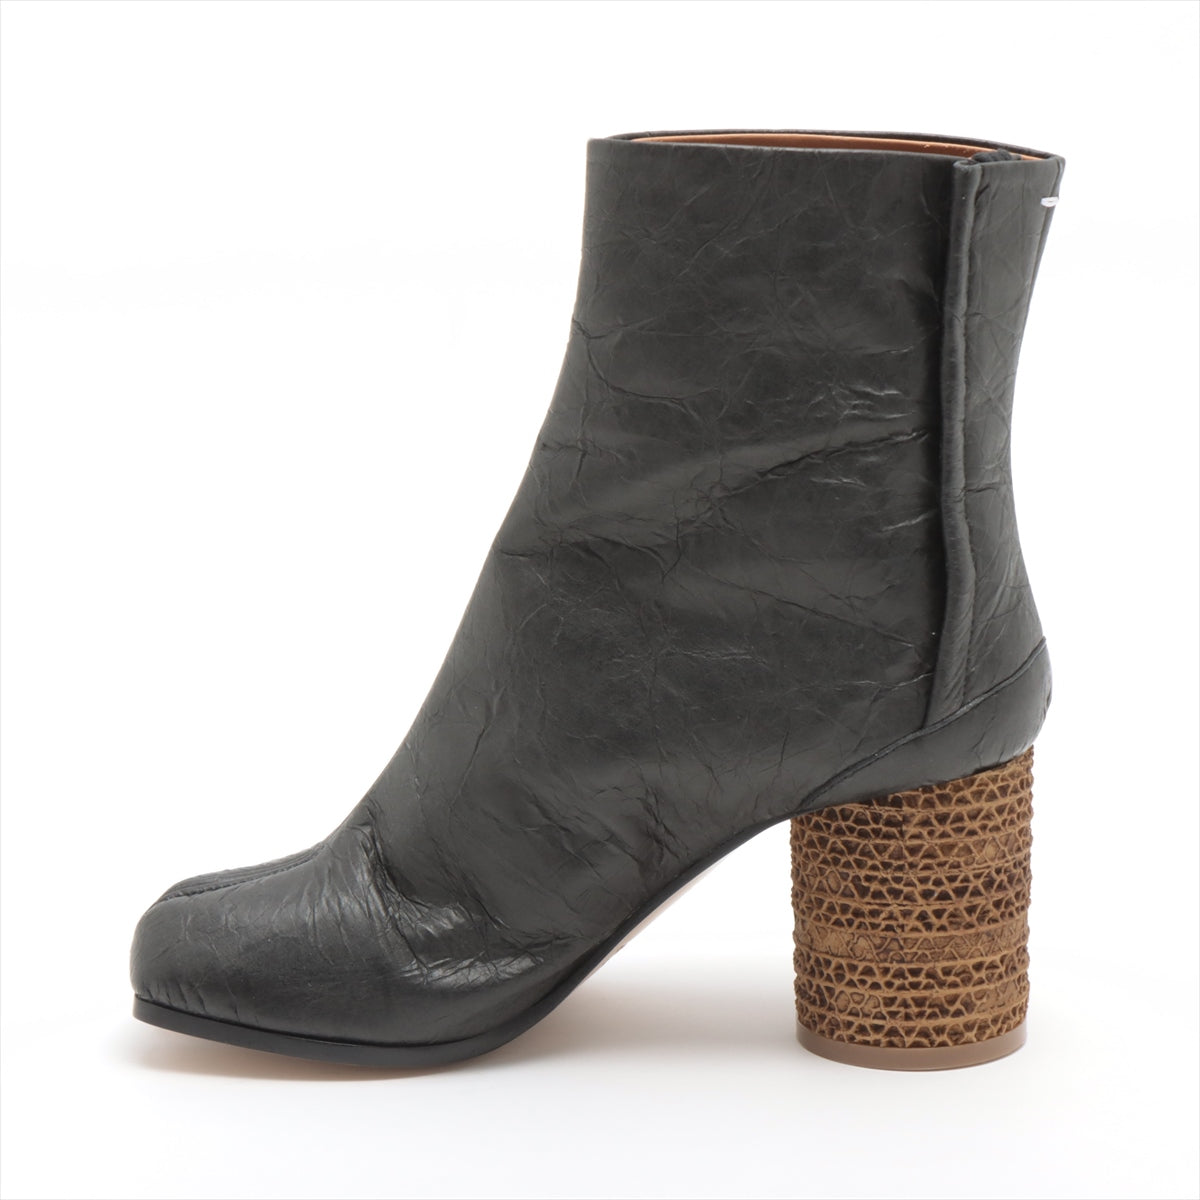 Maison Margiela TABI Leather Short Boots 35 1/2 Ladies' Black S58WU0381 Wrinkle processing 22 box There is a bag